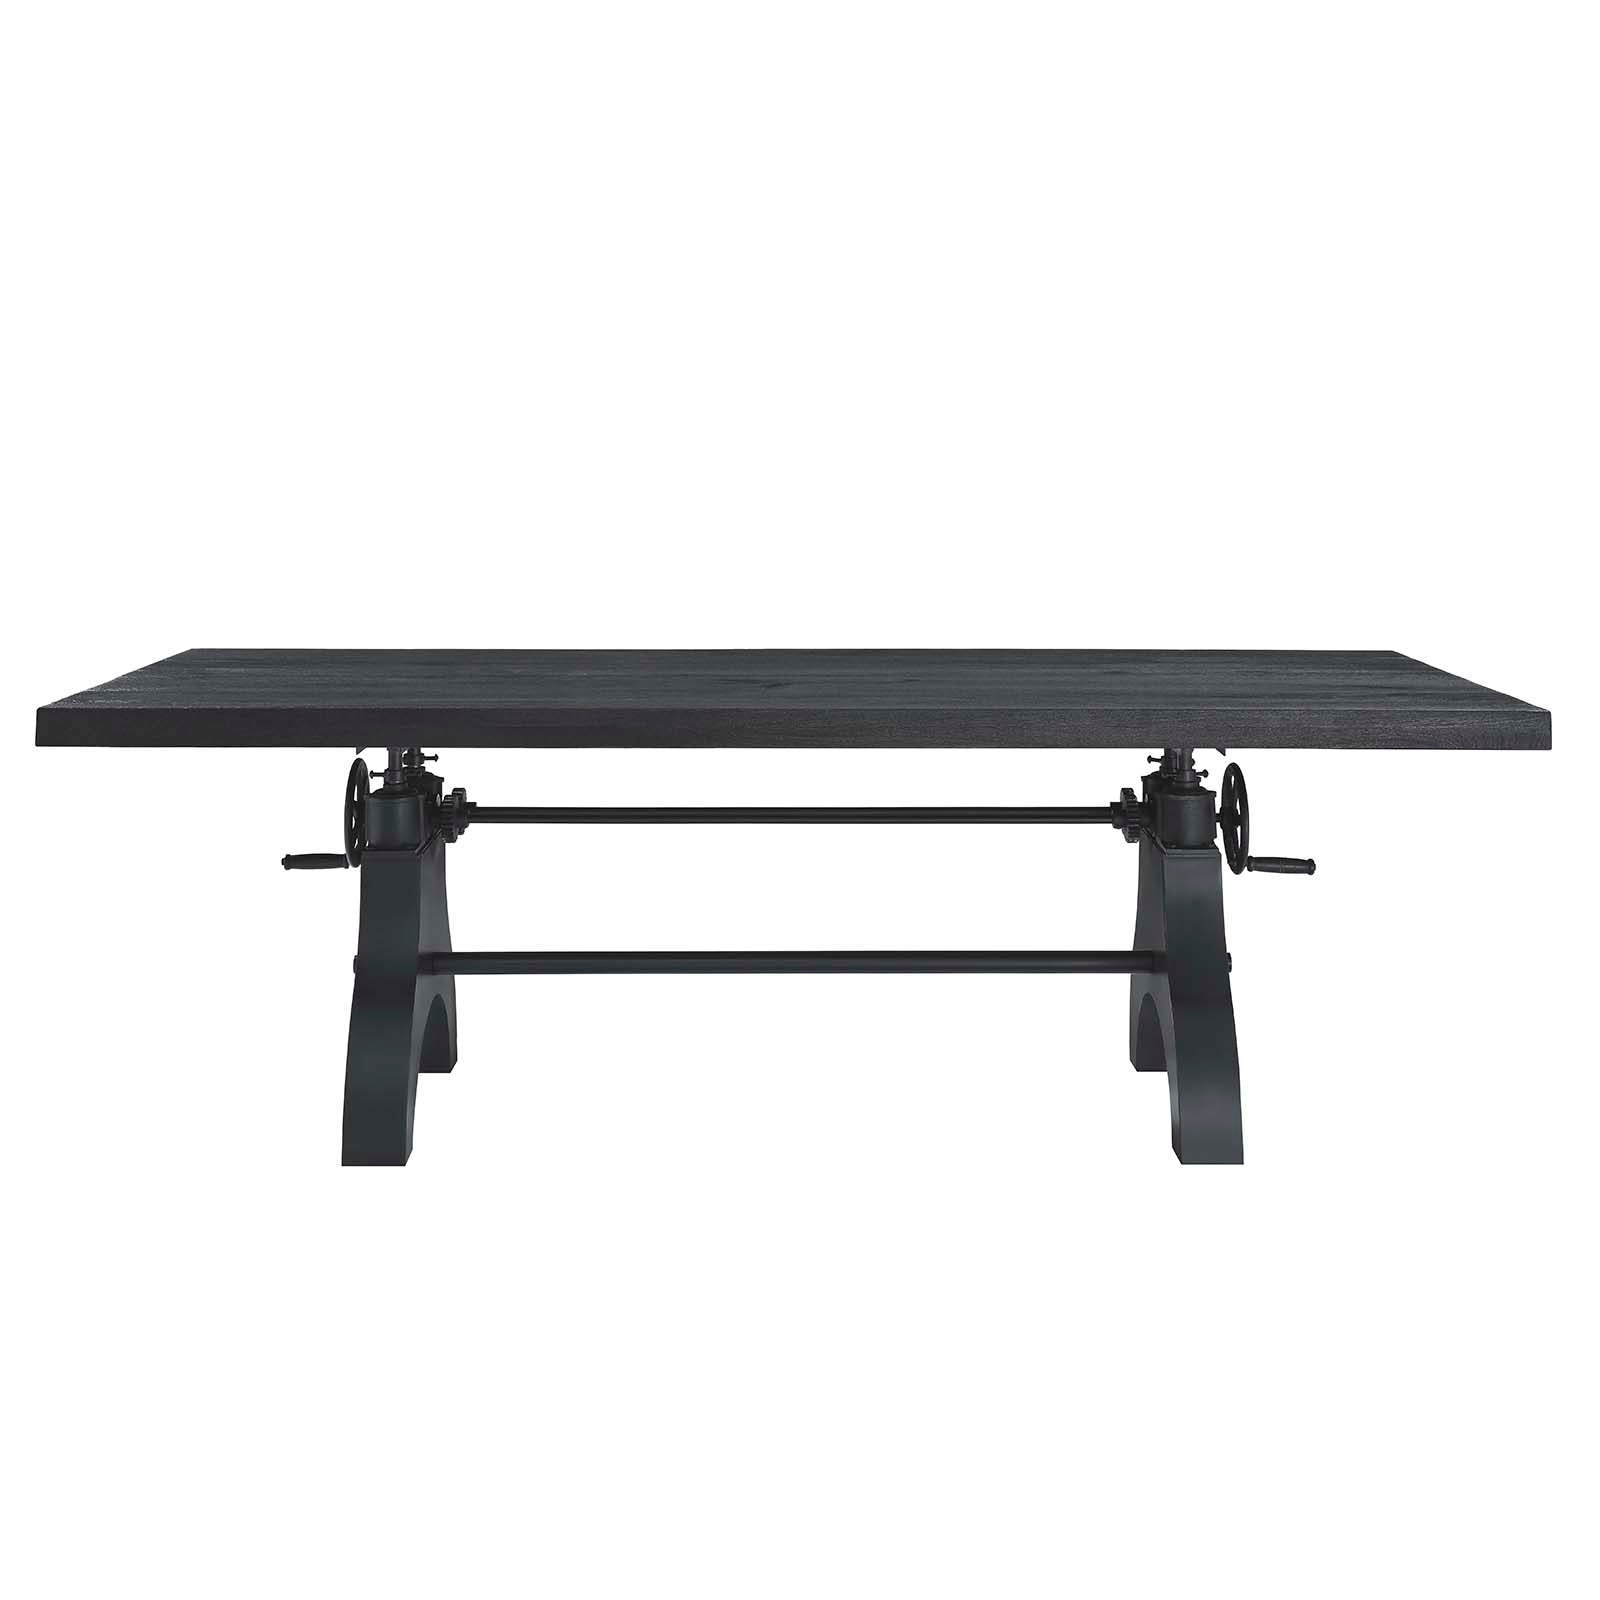 Genuine 96" Adjustable Height Dining and Conference Table - East Shore Modern Home Furnishings